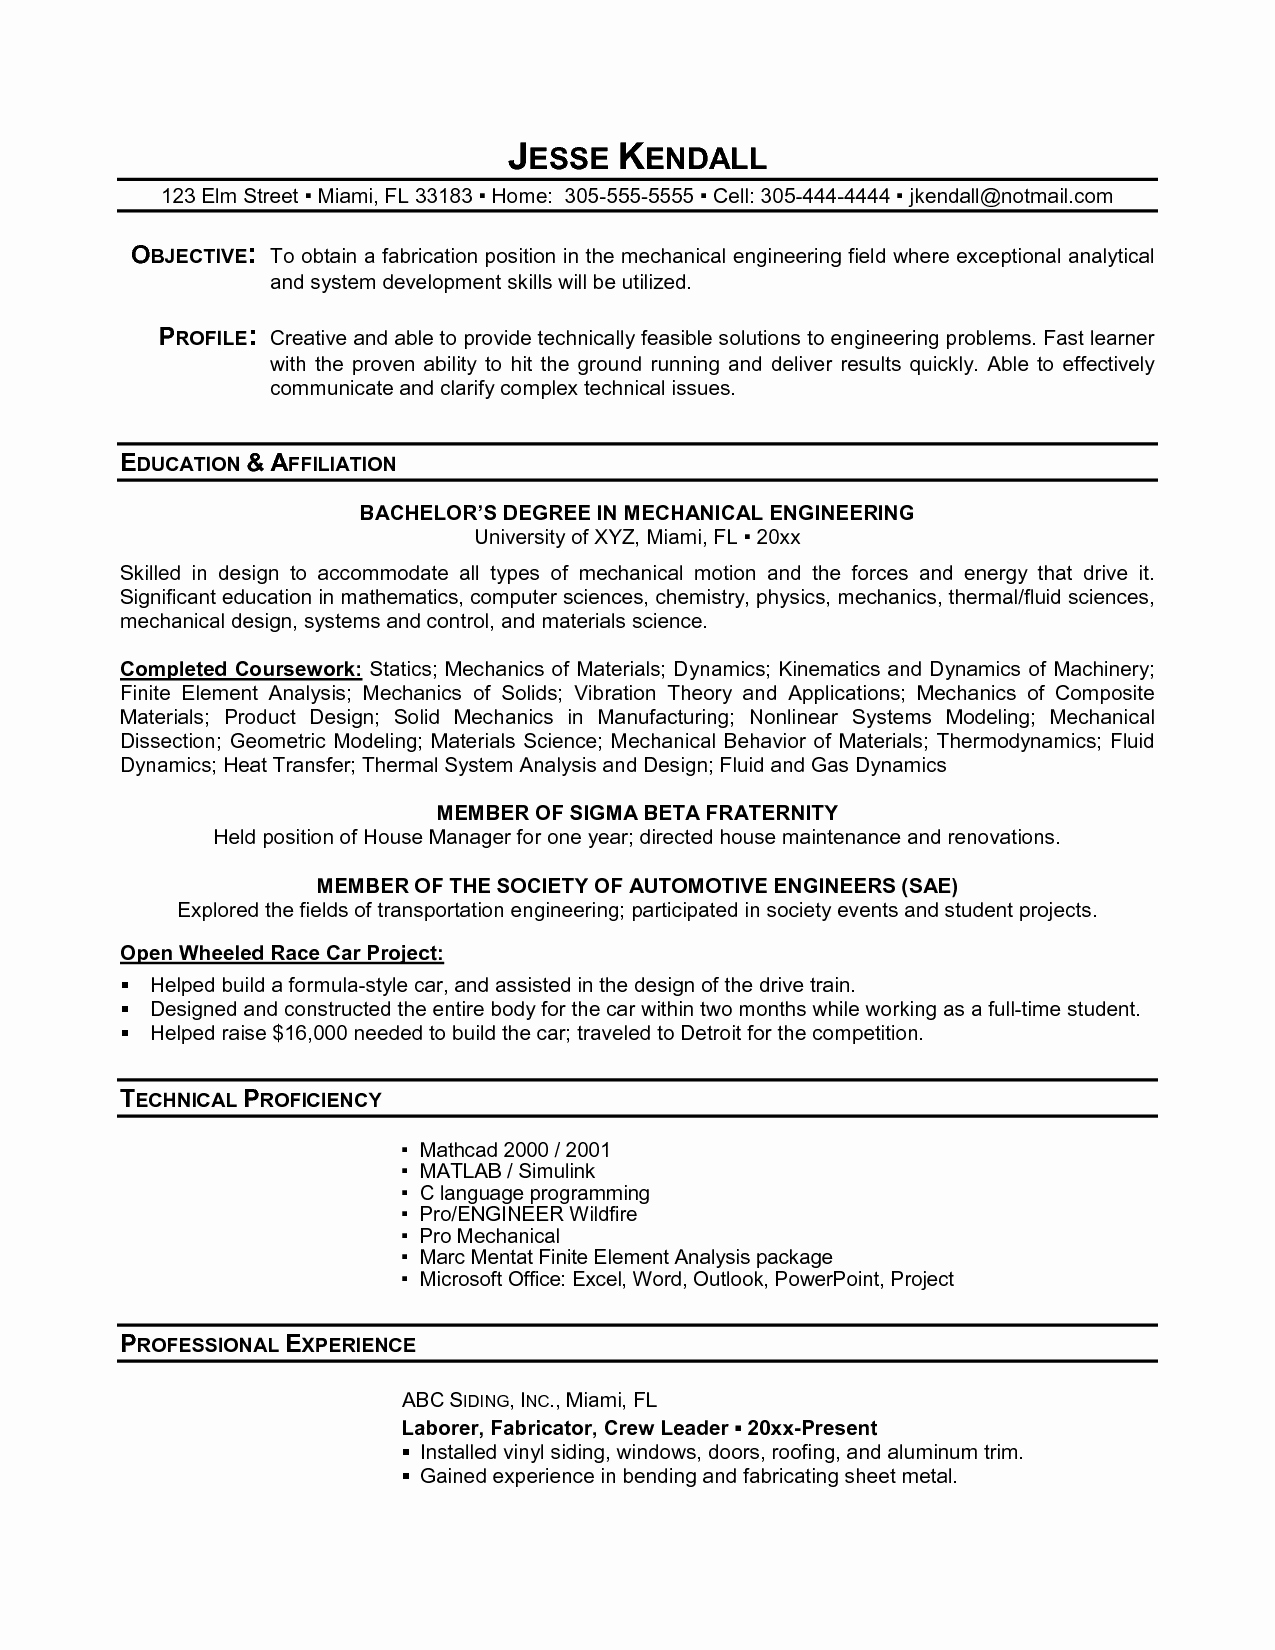 Free Resume Templates for Students Luxury Resume Examples Student Examples Collge High School